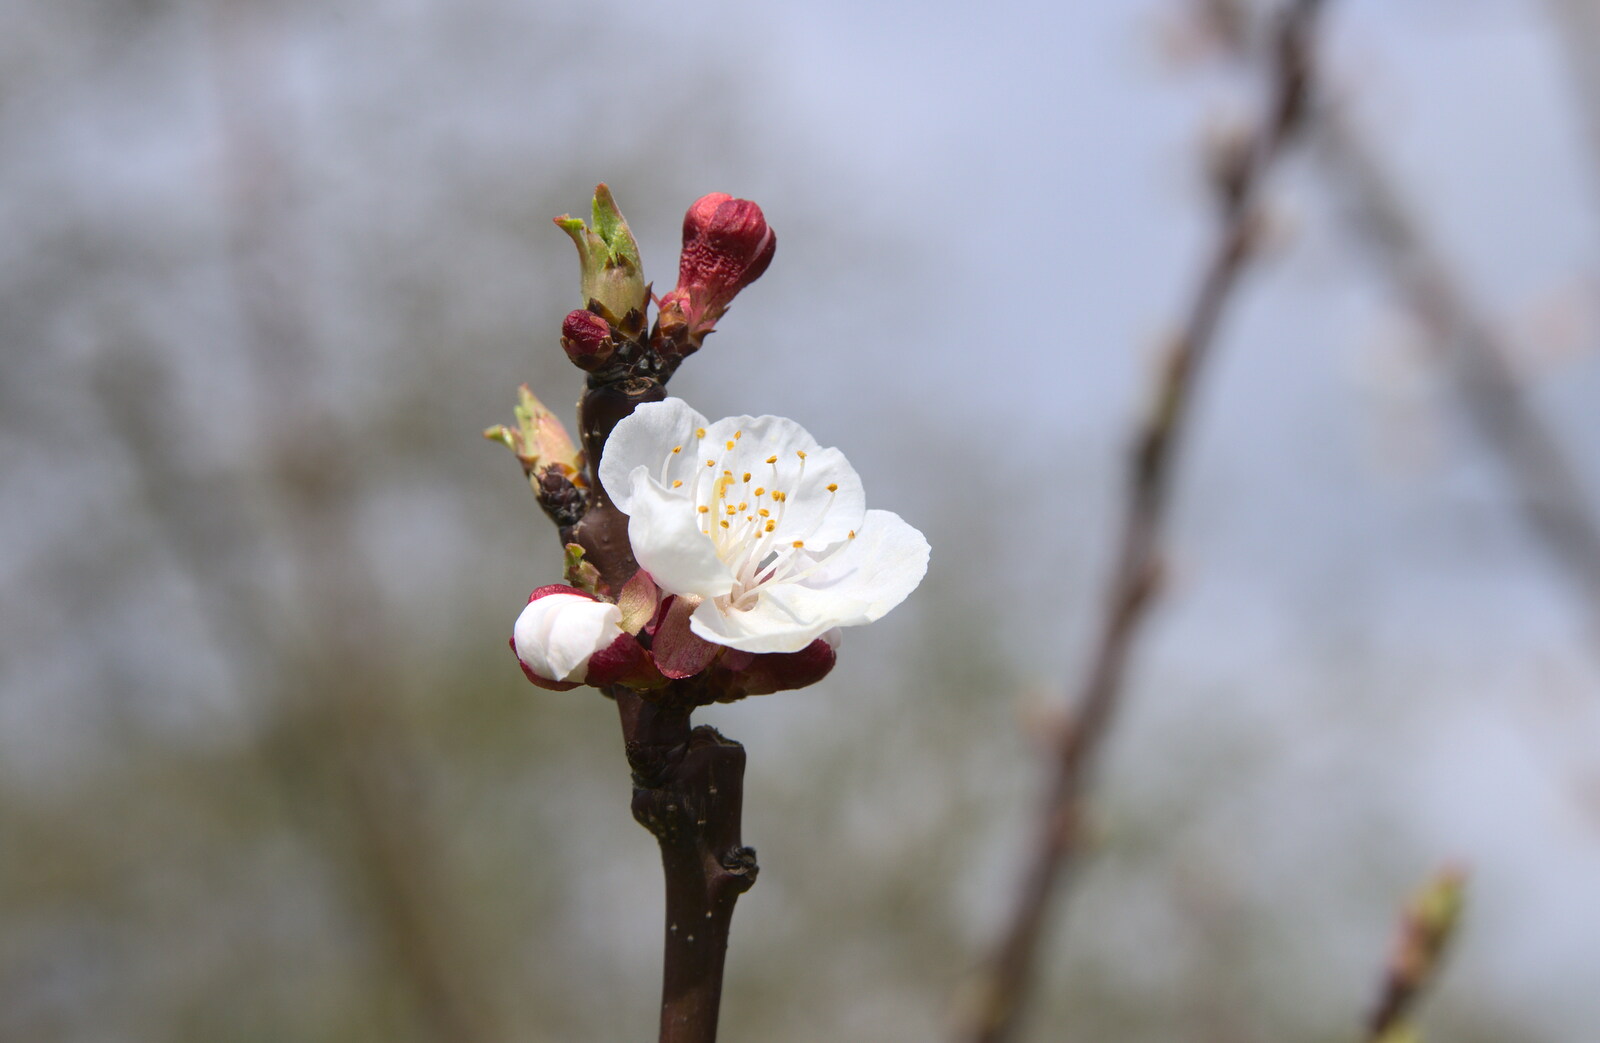 Opening blossom on an Apricot tree from Isobel's Fun Run, Hartismere High, Eye, Suffolk - 23rd March 2014